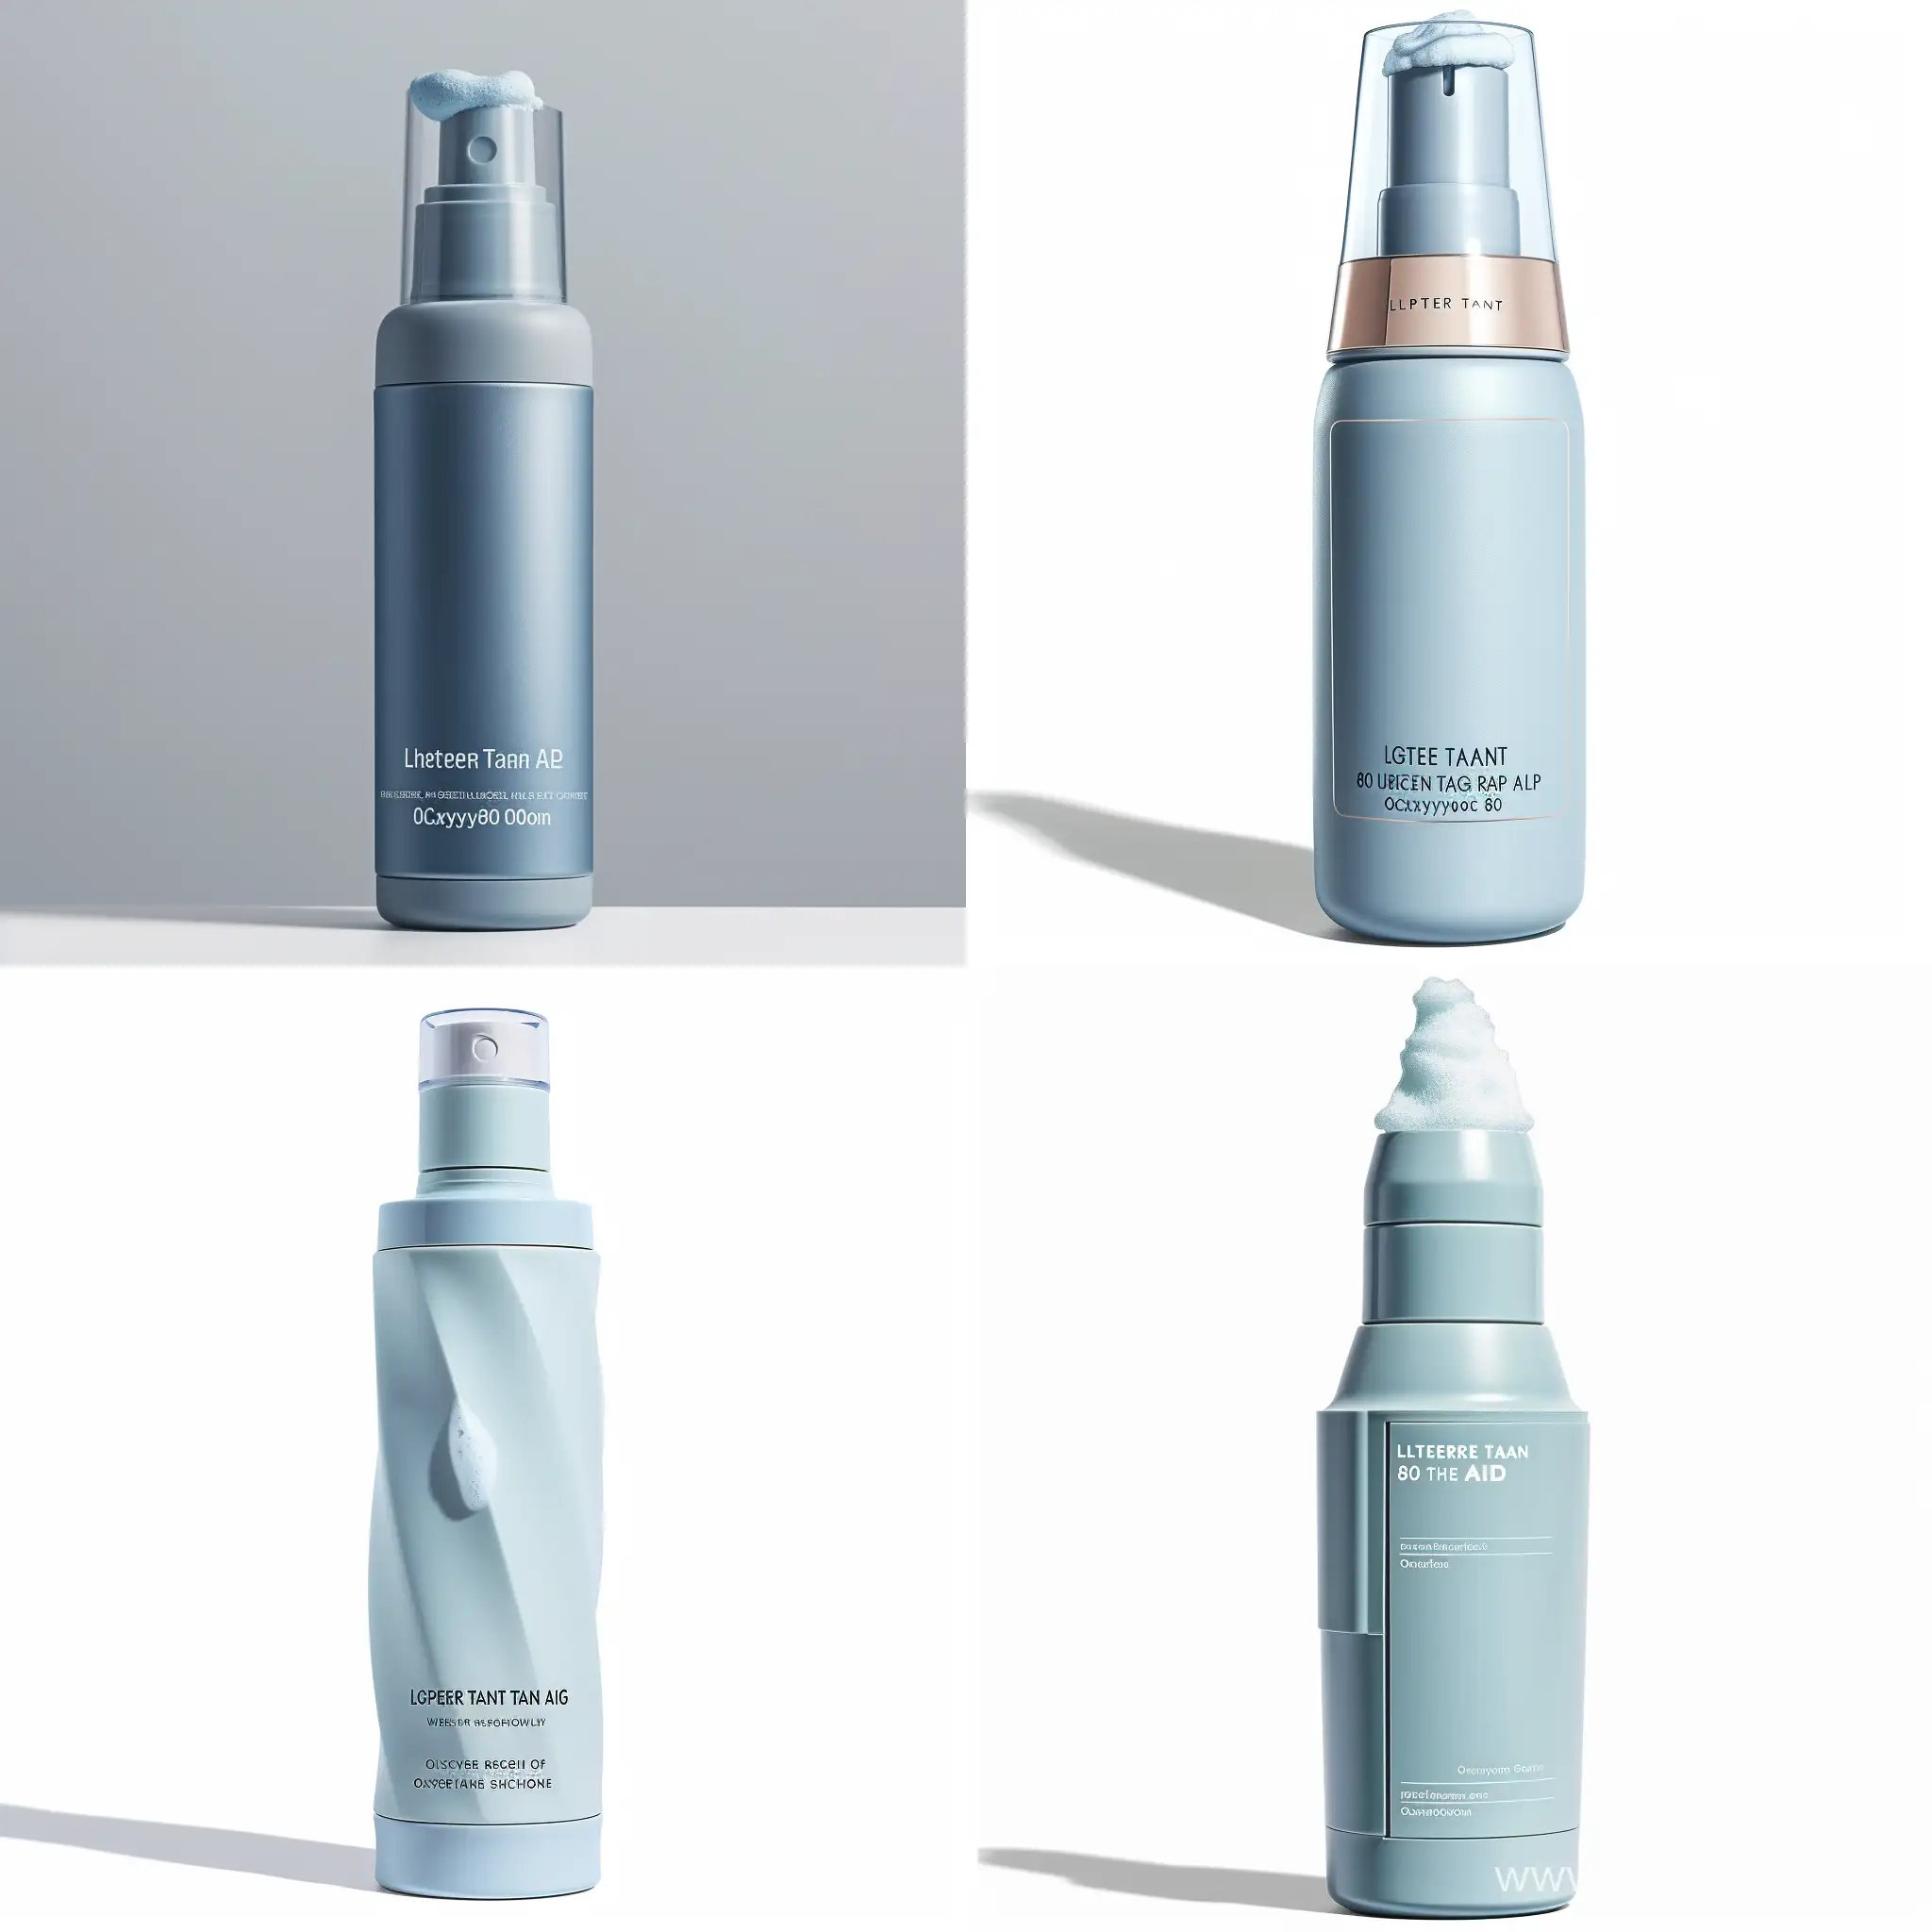 imagine a sleek, pale blue bottle with a modern design. The bottle should have a dispenser for easy and controlled dispensing of the foam. The label on the bottle  "Lighter-Than-Air" texture, "Water-Resistant (80 minutes)," and being "Oxybenzone 